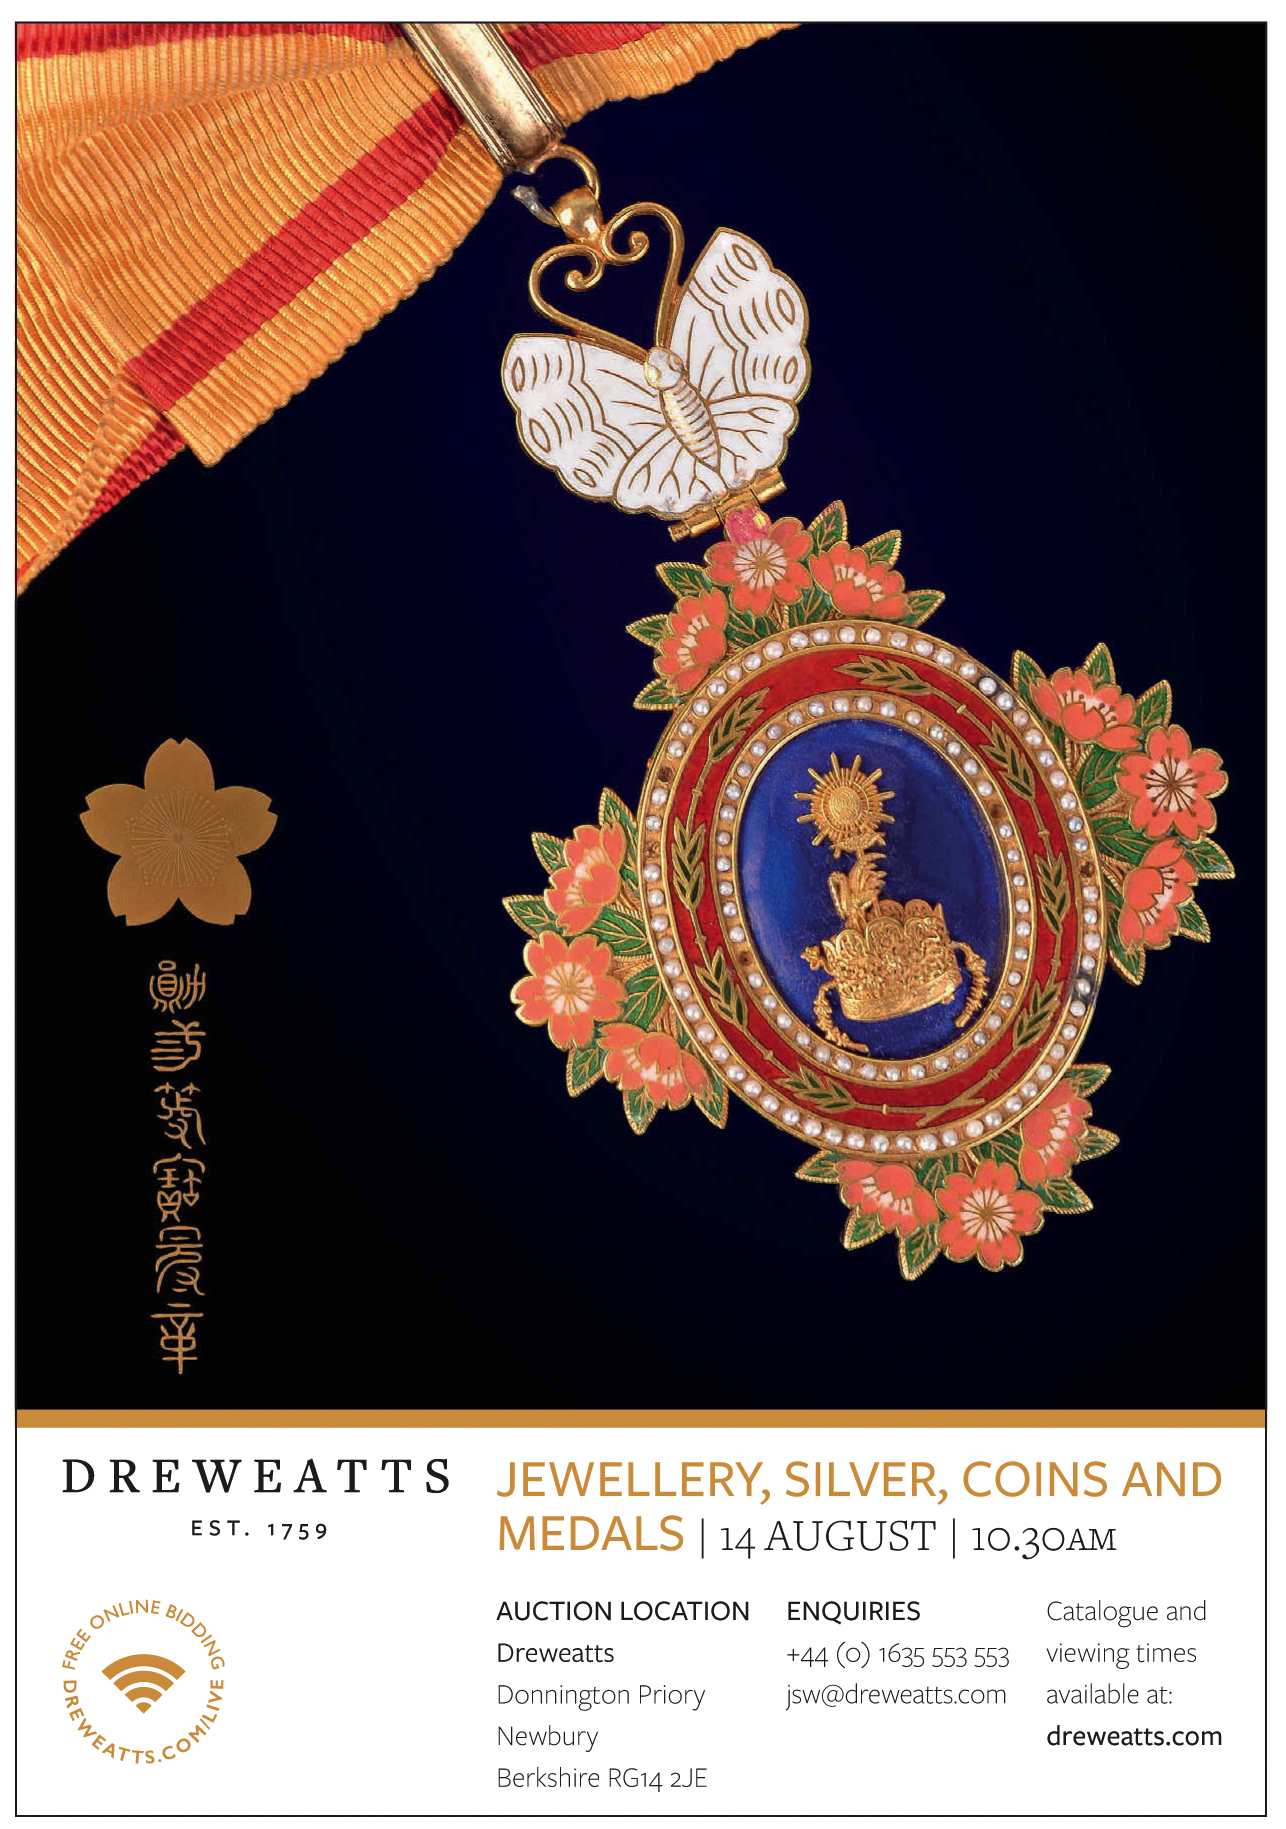 Dreweatts - Jewellery, Silver, Coins and Medals.jpg